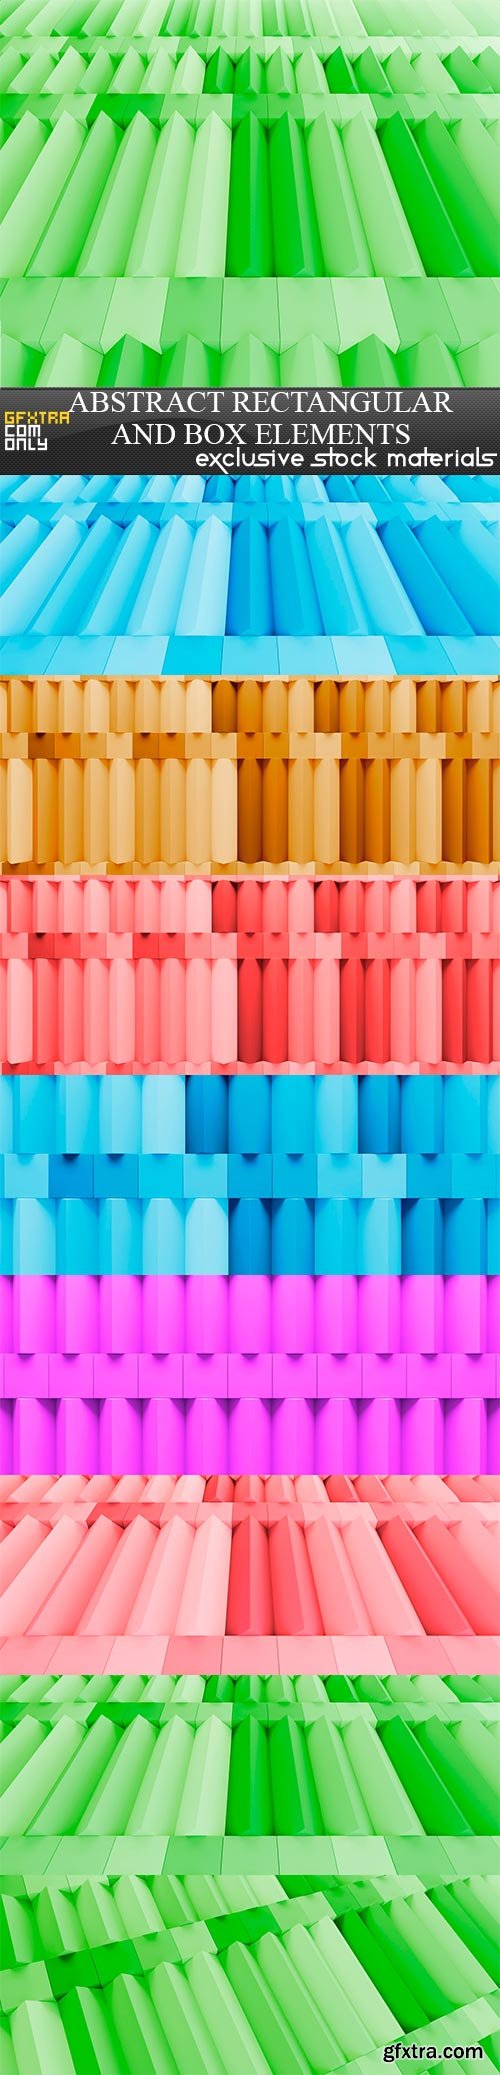 abstract rectangular and box elements background with, 8 x UHQ JPEG